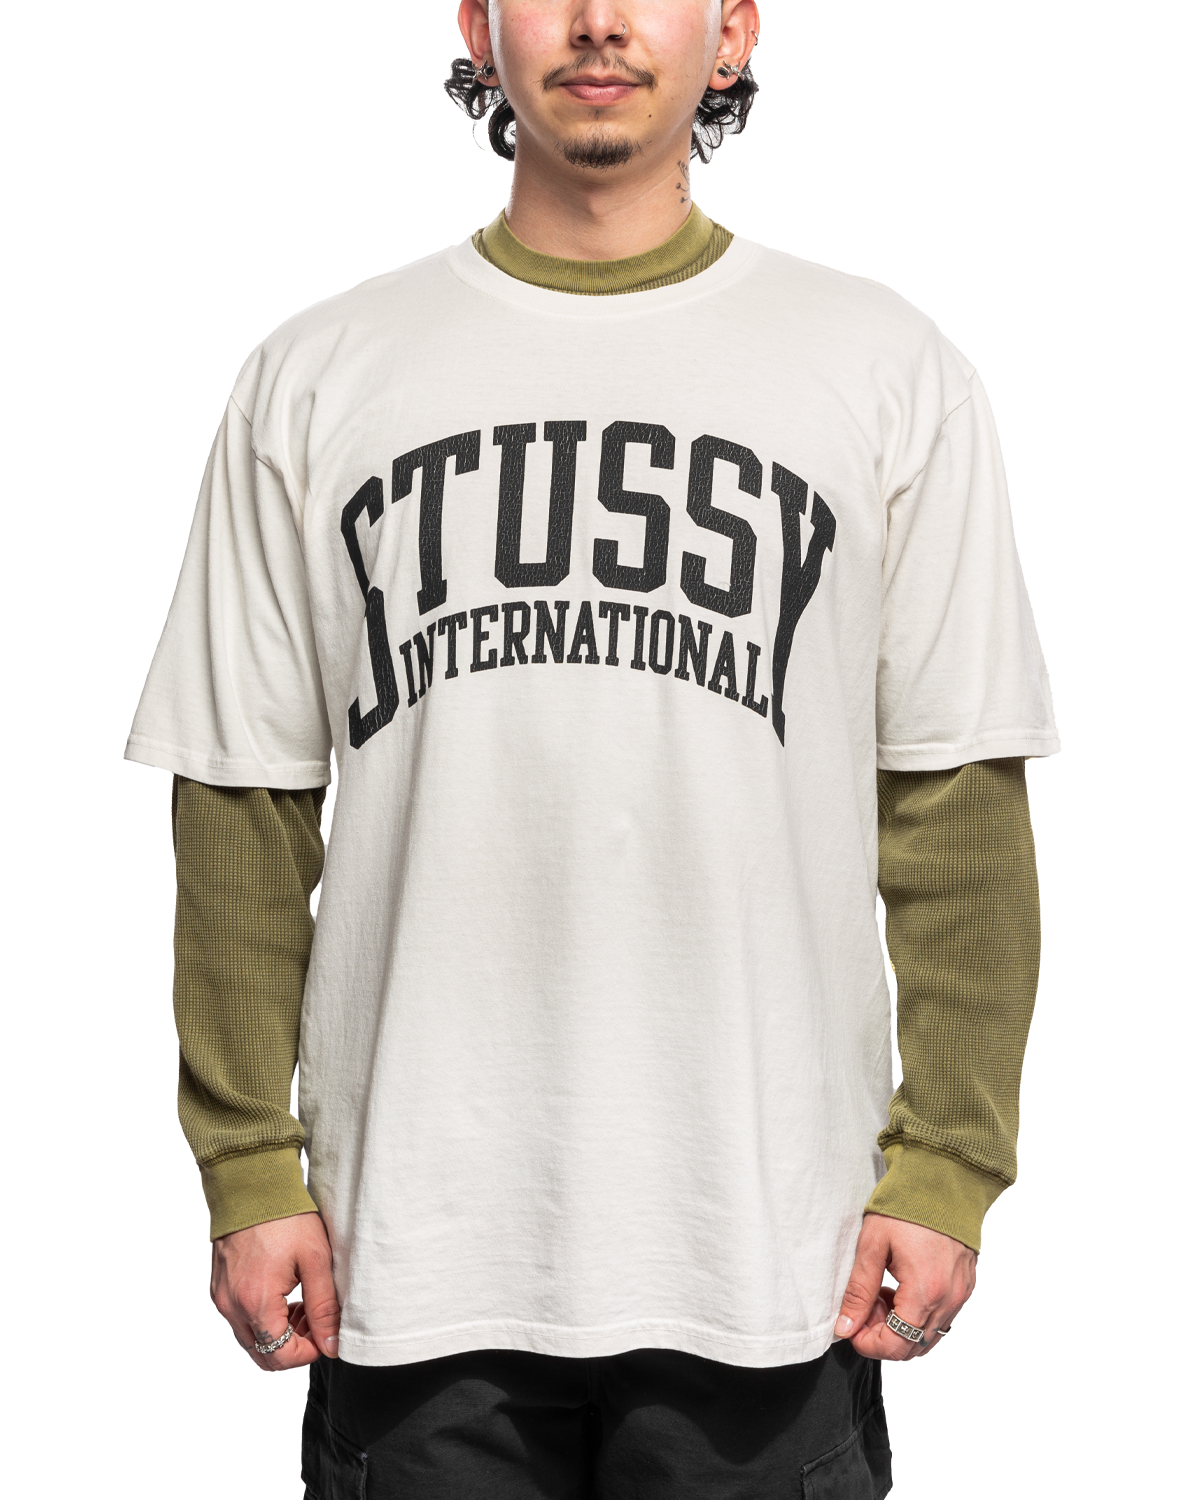 Stussy International Pigment Dyed Natural